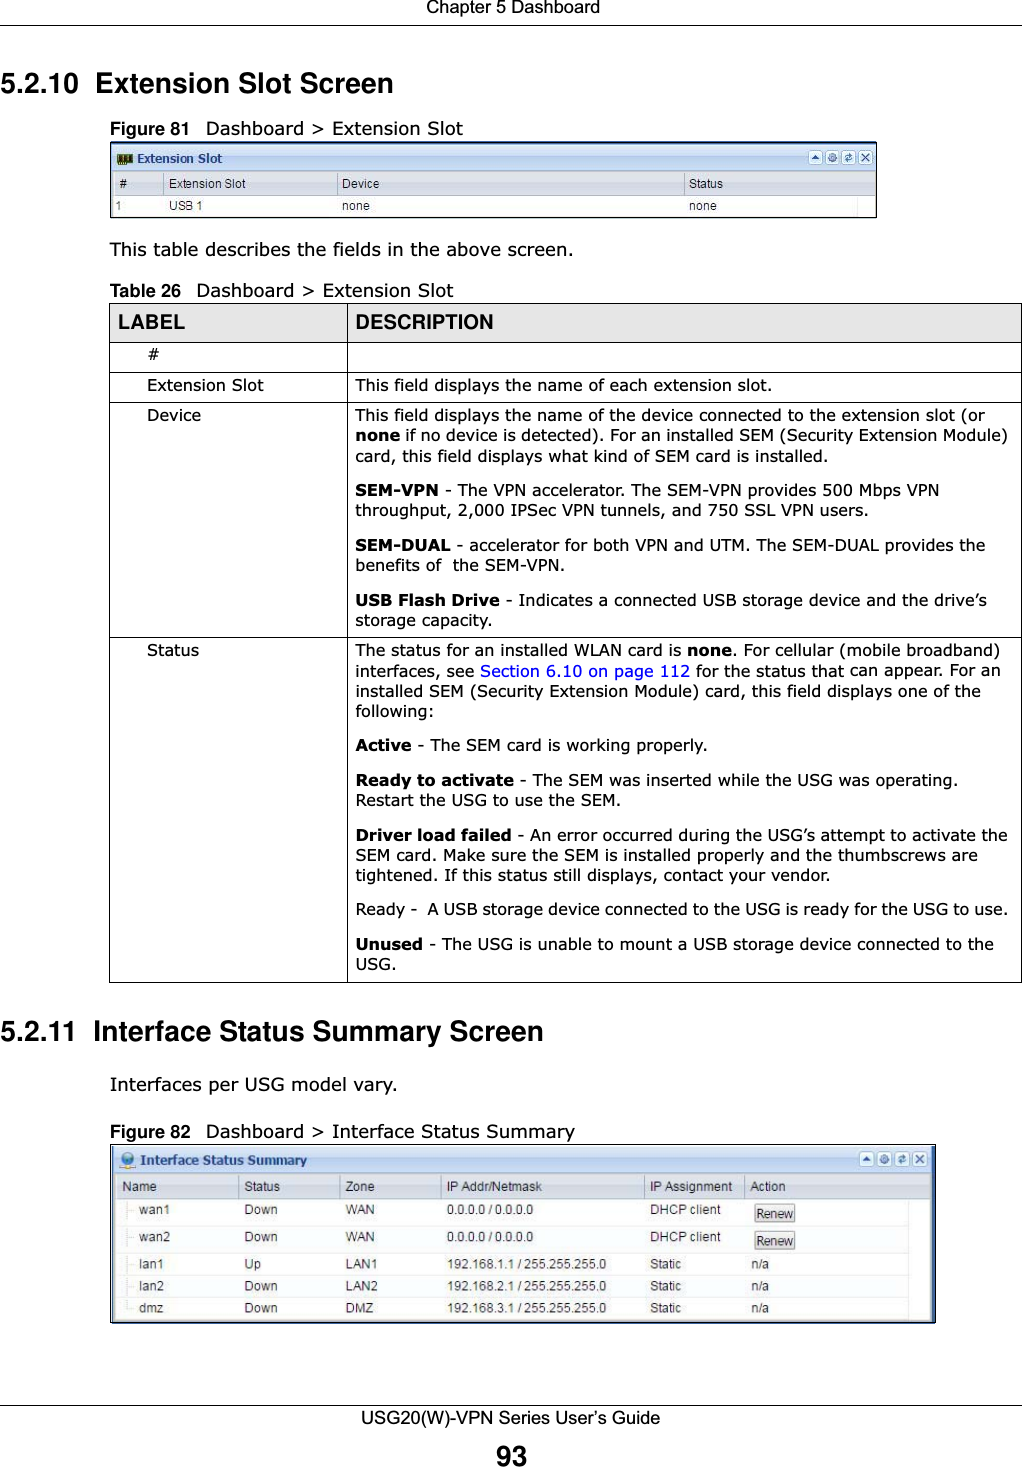  Chapter 5 DashboardUSG20(W)-VPN Series User’s Guide935.2.10  Extension Slot ScreenFigure 81   Dashboard &gt; Extension SlotThis table describes the fields in the above screen. 5.2.11  Interface Status Summary ScreenInterfaces per USG model vary.Figure 82   Dashboard &gt; Interface Status Summary    Table 26   Dashboard &gt; Extension SlotLABEL DESCRIPTION#Extension Slot This field displays the name of each extension slot.Device This field displays the name of the device connected to the extension slot (or none if no device is detected). For an installed SEM (Security Extension Module) card, this field displays what kind of SEM card is installed. SEM-VPN - The VPN accelerator. The SEM-VPN provides 500 Mbps VPN throughput, 2,000 IPSec VPN tunnels, and 750 SSL VPN users.SEM-DUAL - accelerator for both VPN and UTM. The SEM-DUAL provides the benefits of  the SEM-VPN.USB Flash Drive - Indicates a connected USB storage device and the drive’s storage capacity.Status The status for an installed WLAN card is none. For cellular (mobile broadband) interfaces, see Section 6.10 on page 112 for the status that can appear. For an installed SEM (Security Extension Module) card, this field displays one of the following: Active - The SEM card is working properly.Ready to activate - The SEM was inserted while the USG was operating. Restart the USG to use the SEM.Driver load failed - An error occurred during the USG’s attempt to activate the SEM card. Make sure the SEM is installed properly and the thumbscrews are tightened. If this status still displays, contact your vendor.Ready -  A USB storage device connected to the USG is ready for the USG to use. Unused - The USG is unable to mount a USB storage device connected to the USG.